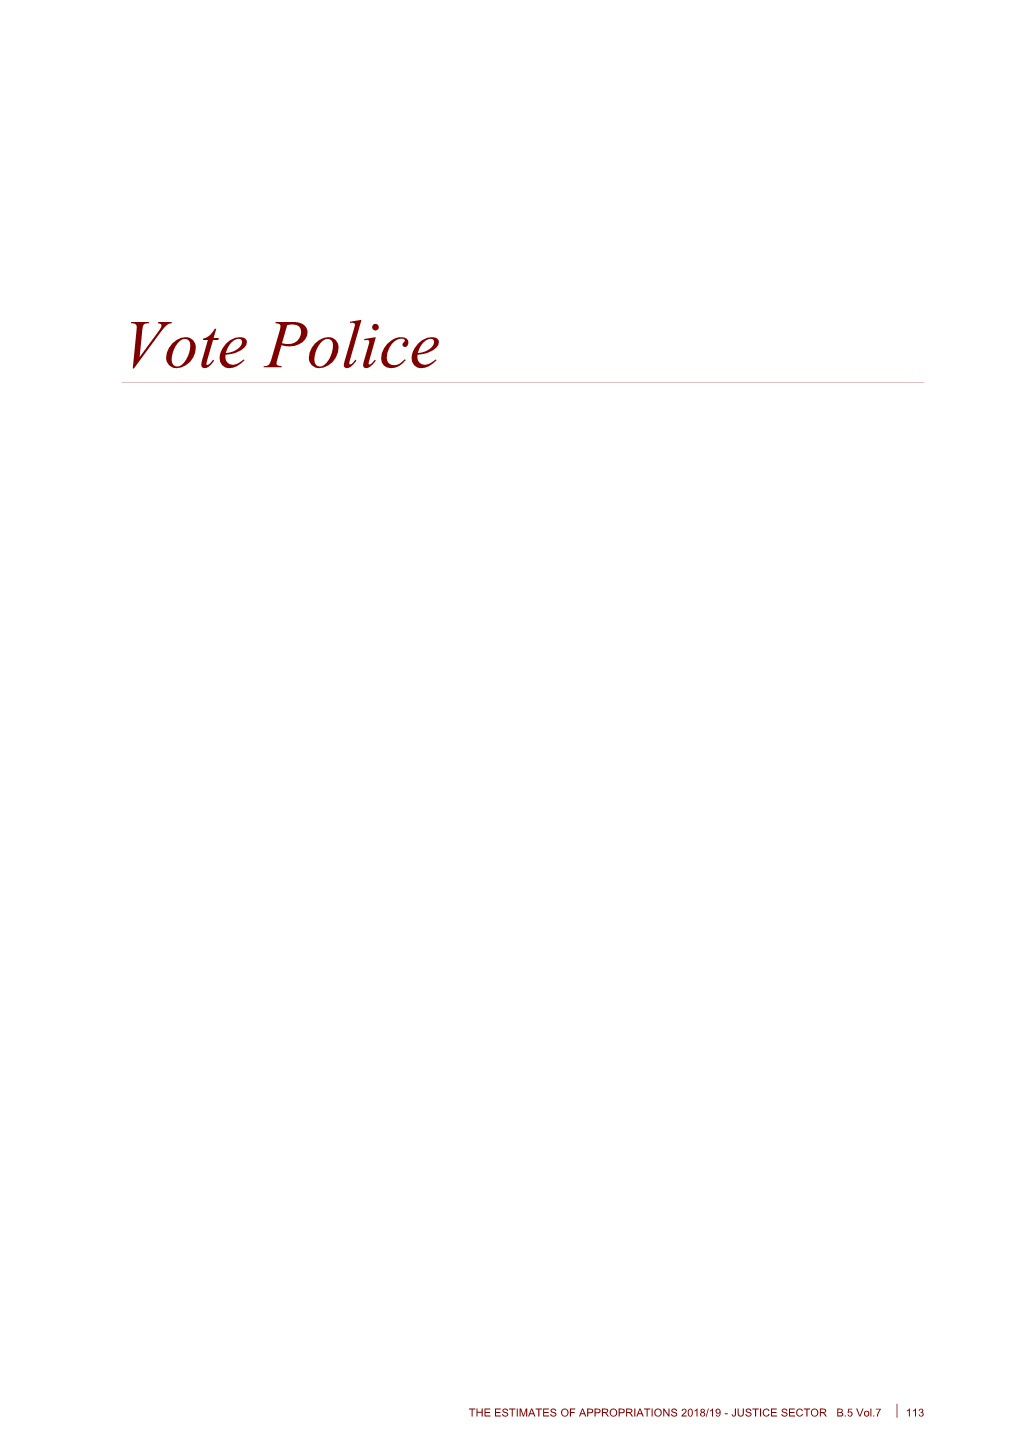 Vote Police - Vol 7 Justice Sector - the Estimates of Appropriations 2018/19 - Budget 2018